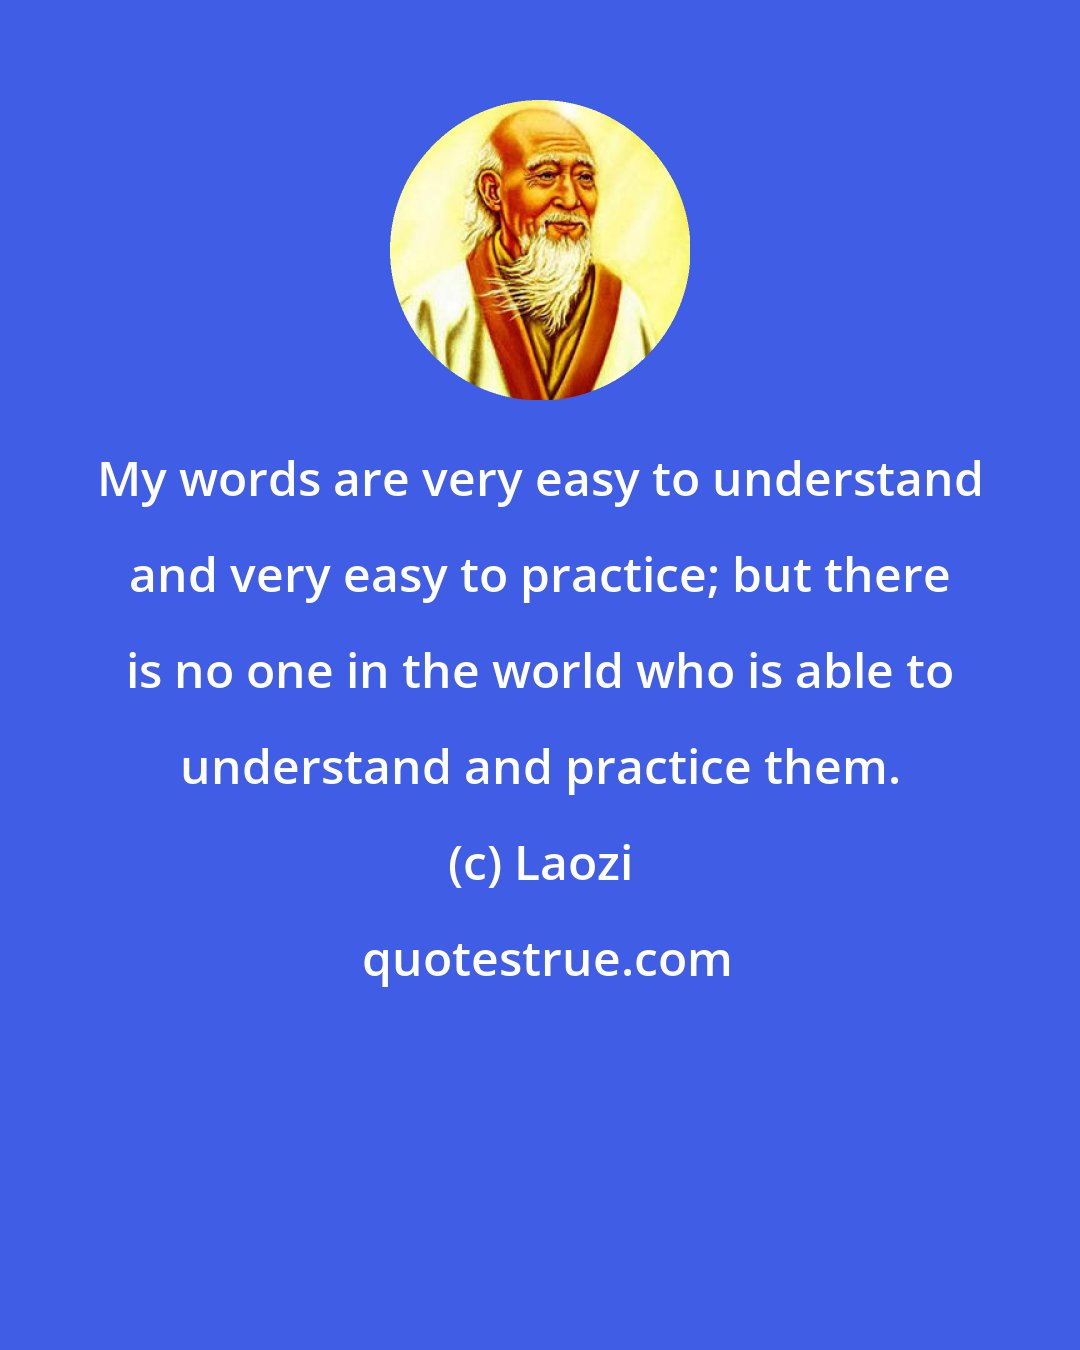 Laozi: My words are very easy to understand and very easy to practice; but there is no one in the world who is able to understand and practice them.